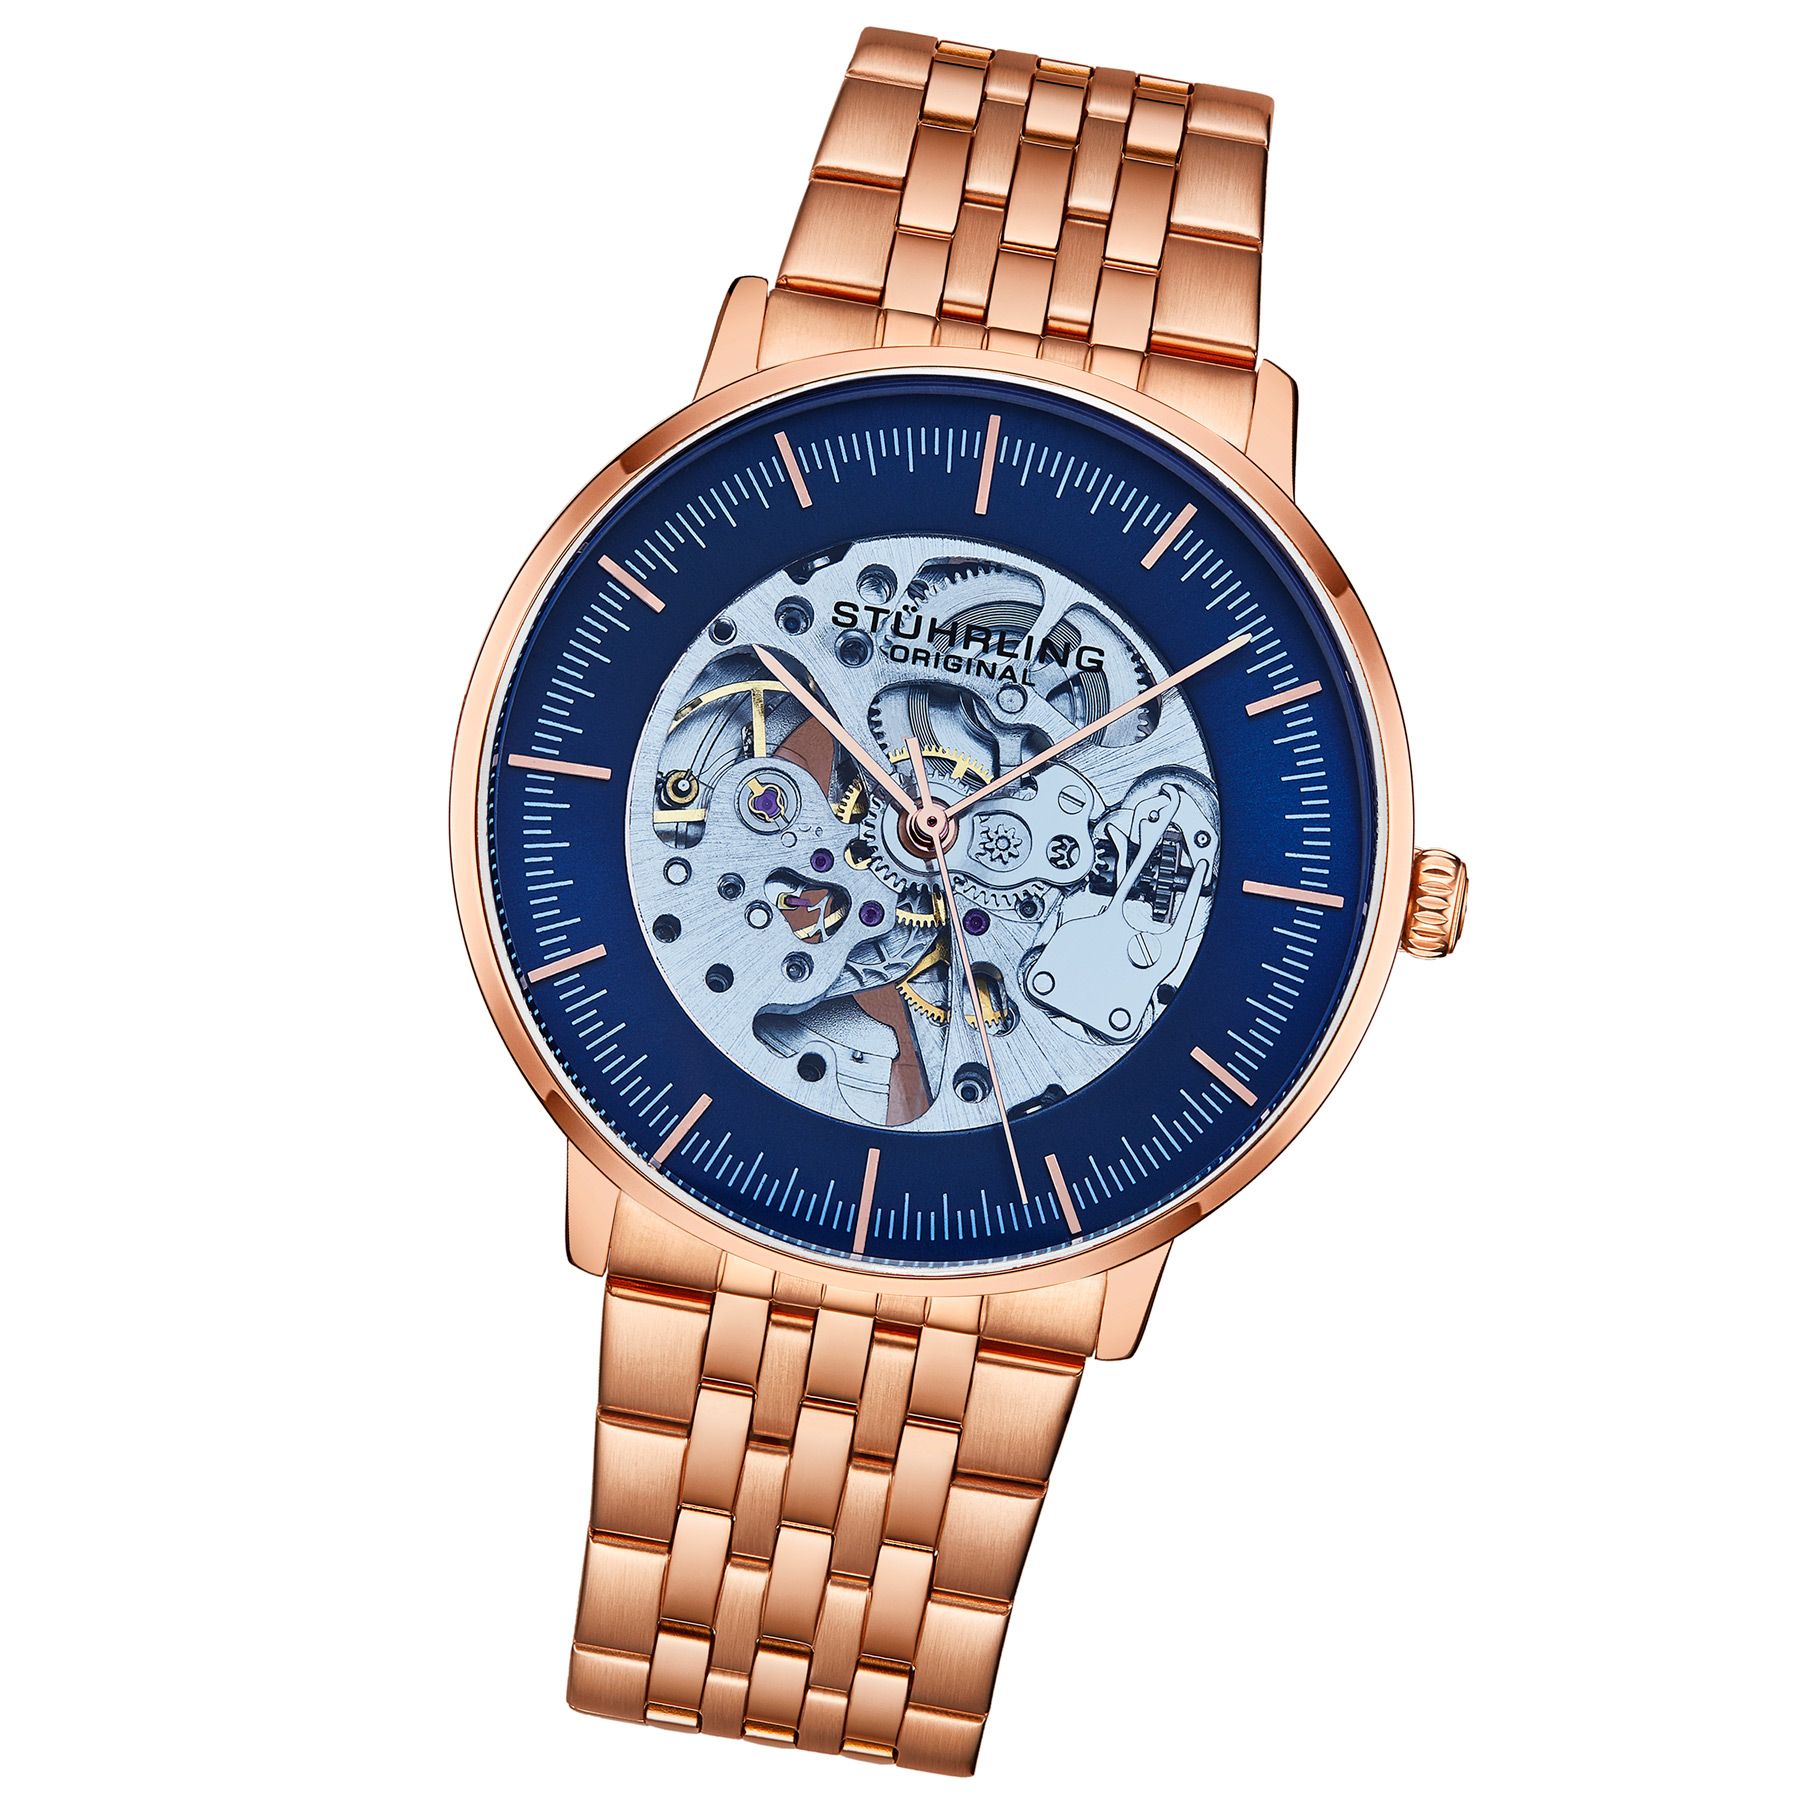 Men's Automatic Rose/Gold Toned Case, Rose/Gold Toned Bezel, Blue Tinted Glass, Blue Dial Ring with Silver Center With Gold Toned Colored Accent, Rose/Gold Toned Hands and Markers, Rose/Gold Toned Link Bracelet Watch